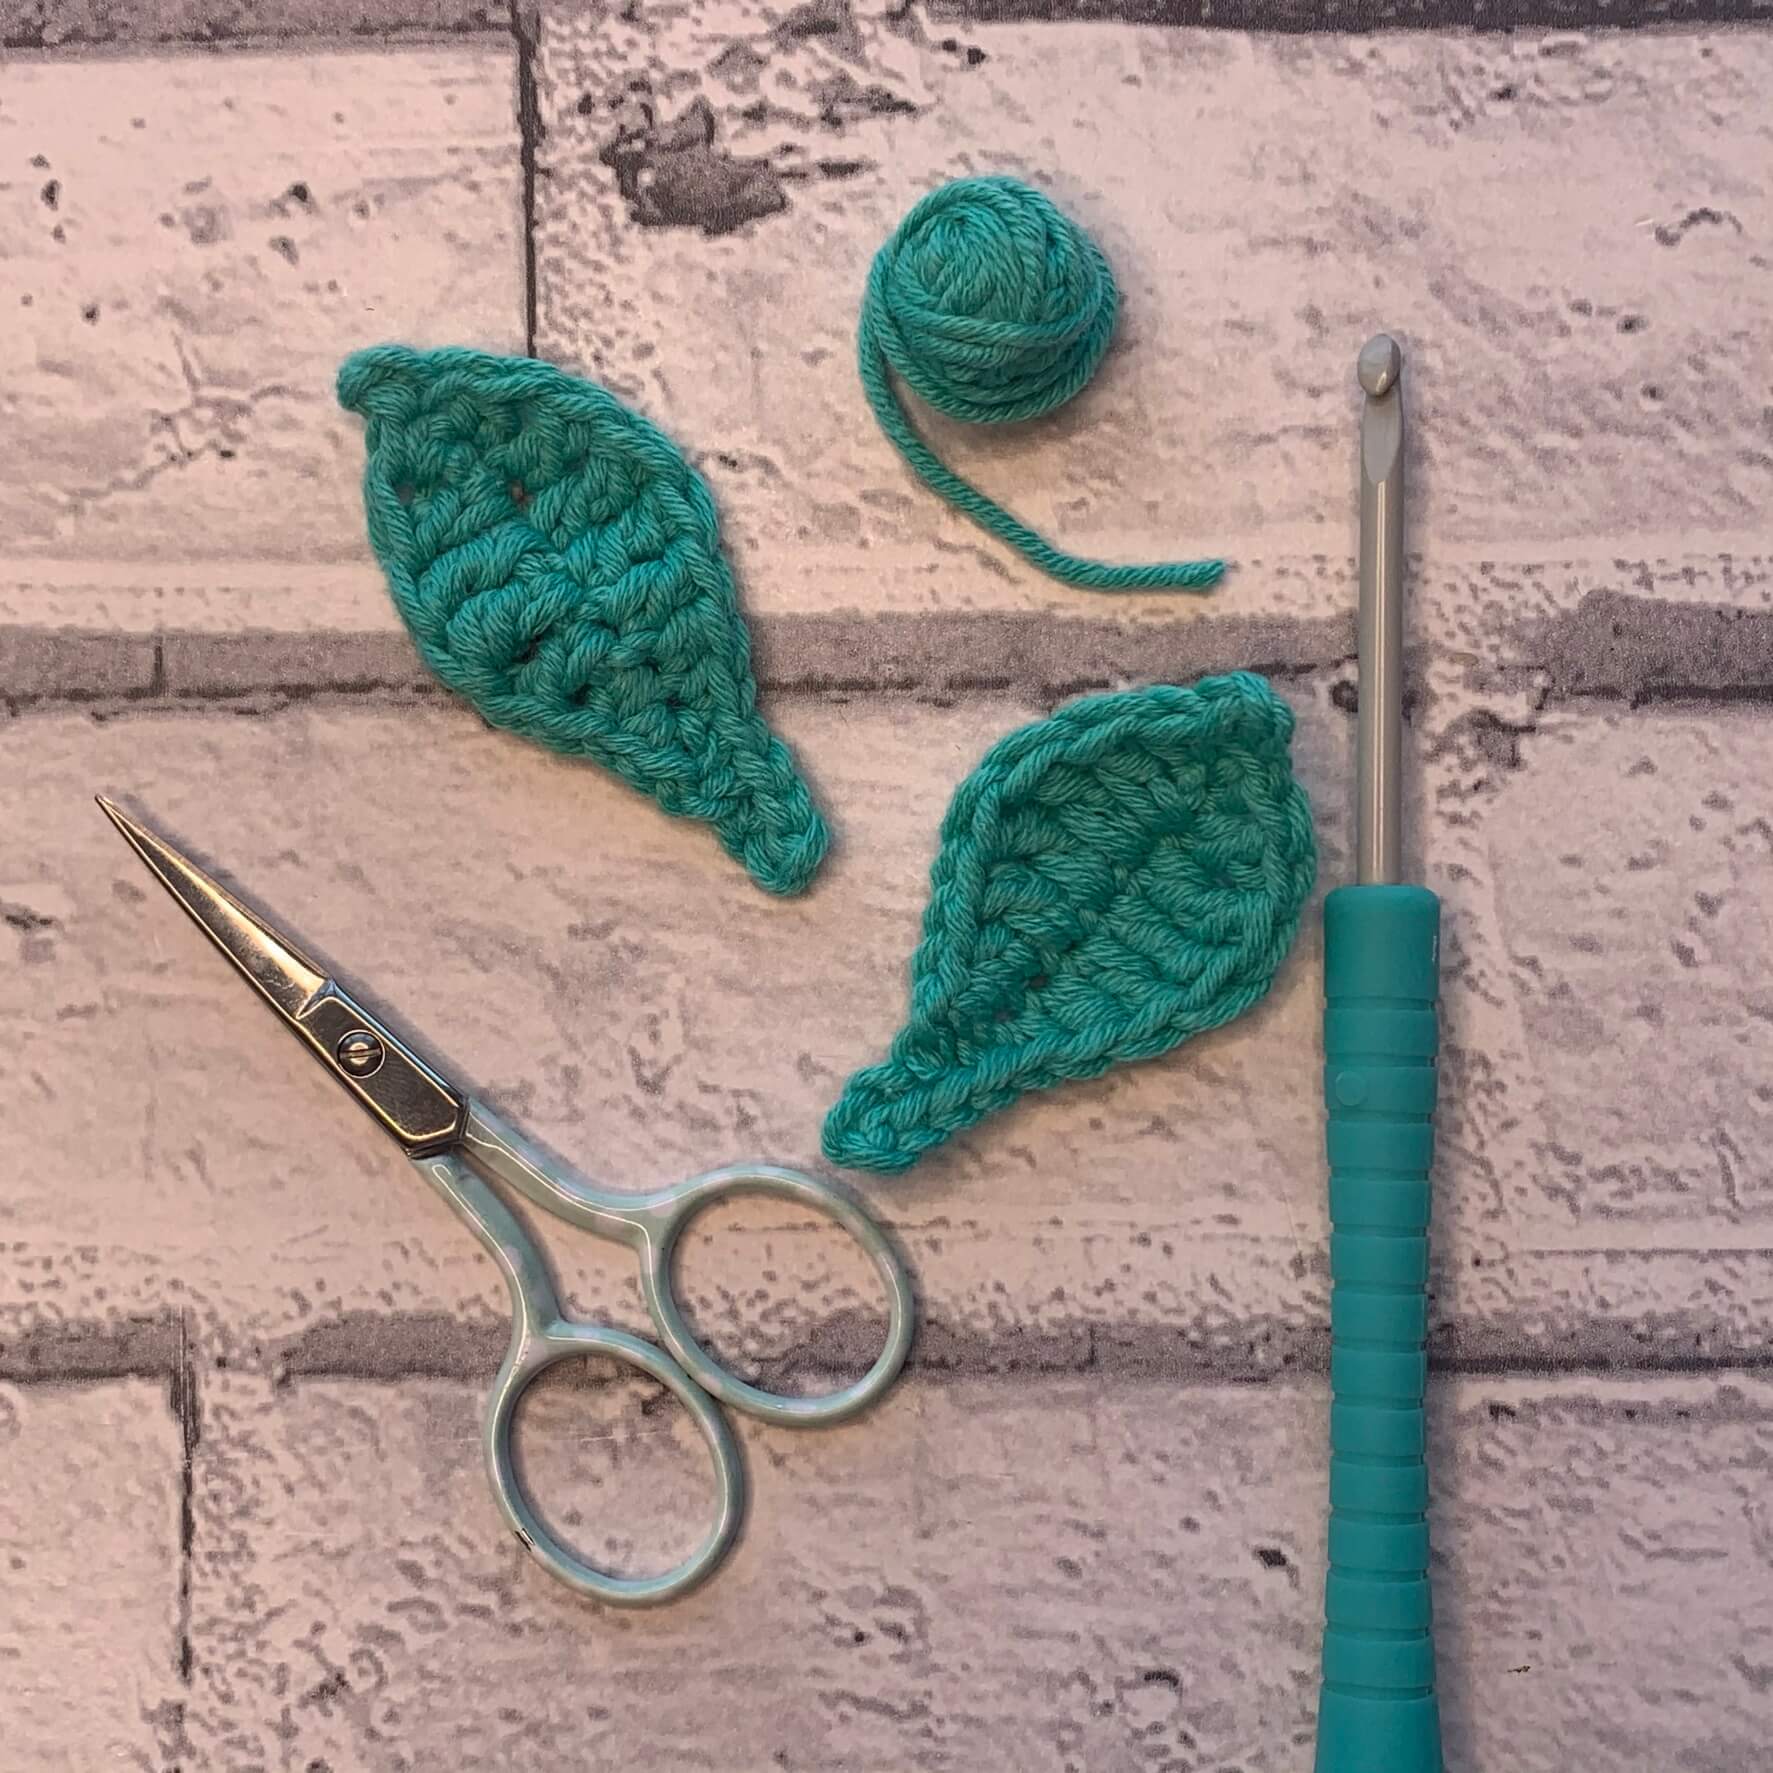 Crochet Leaf Pattern Free with video tutorial